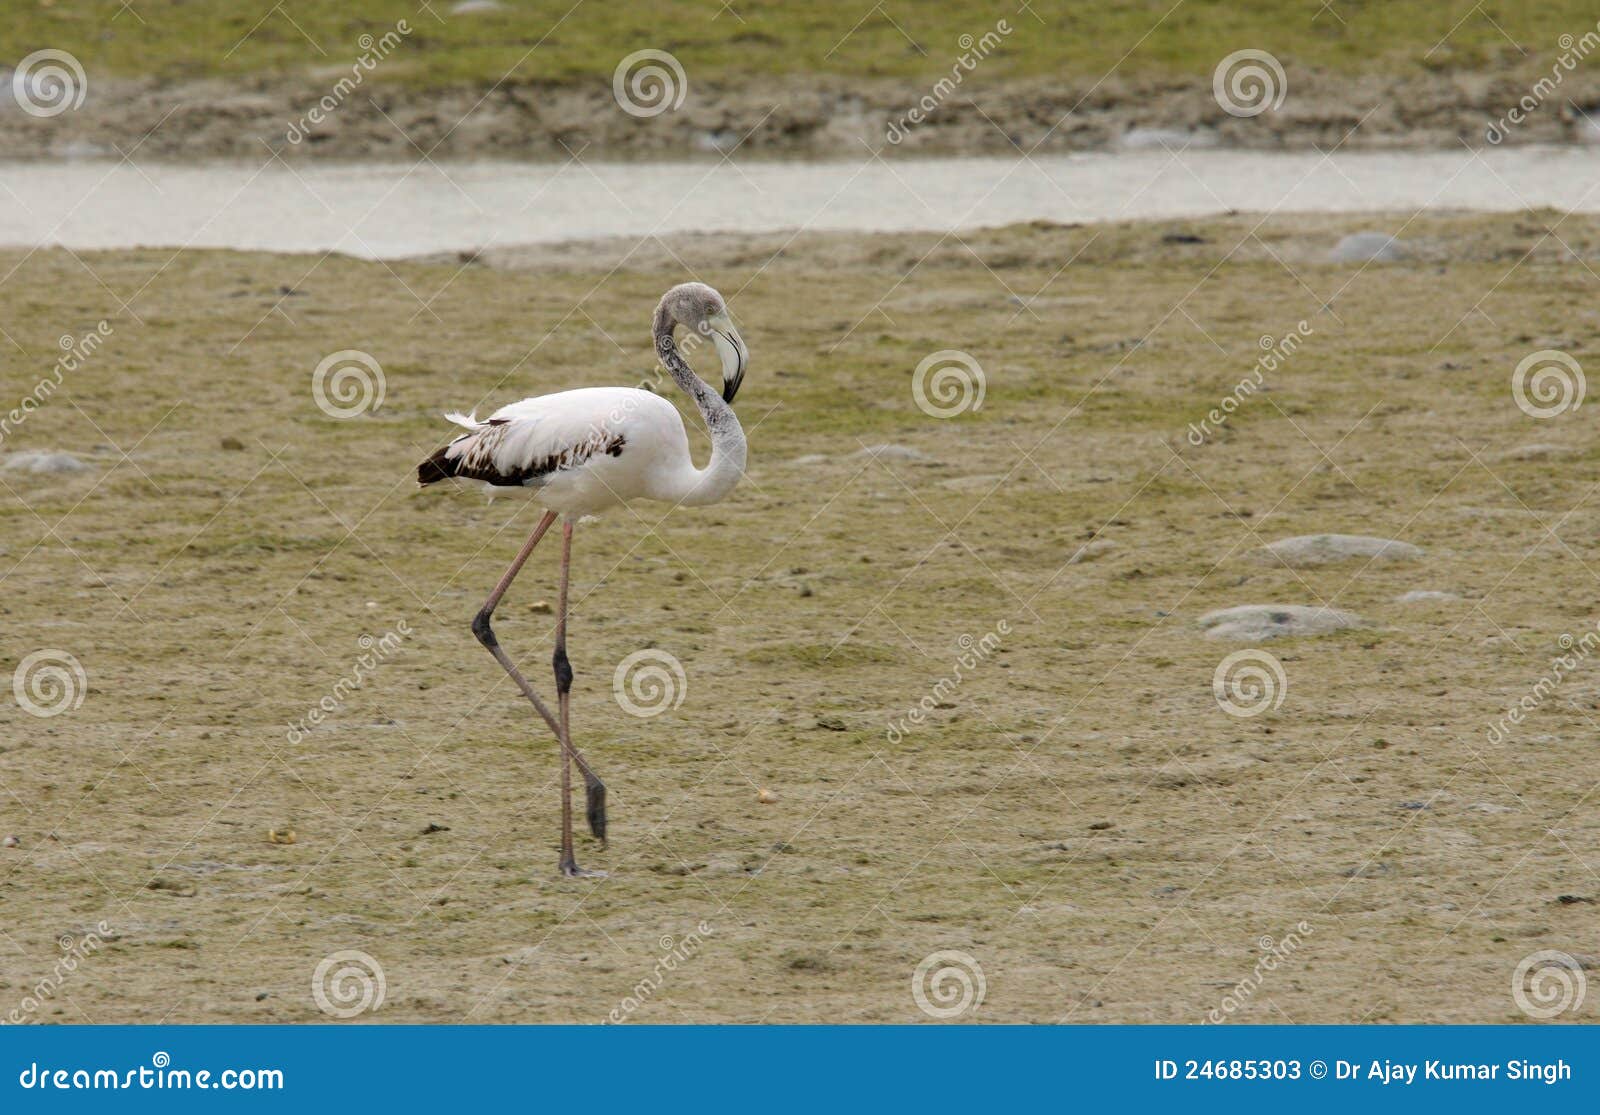 A Beautiful Flamingo Relaxing Stock Image - Image of bipedal, feather ...